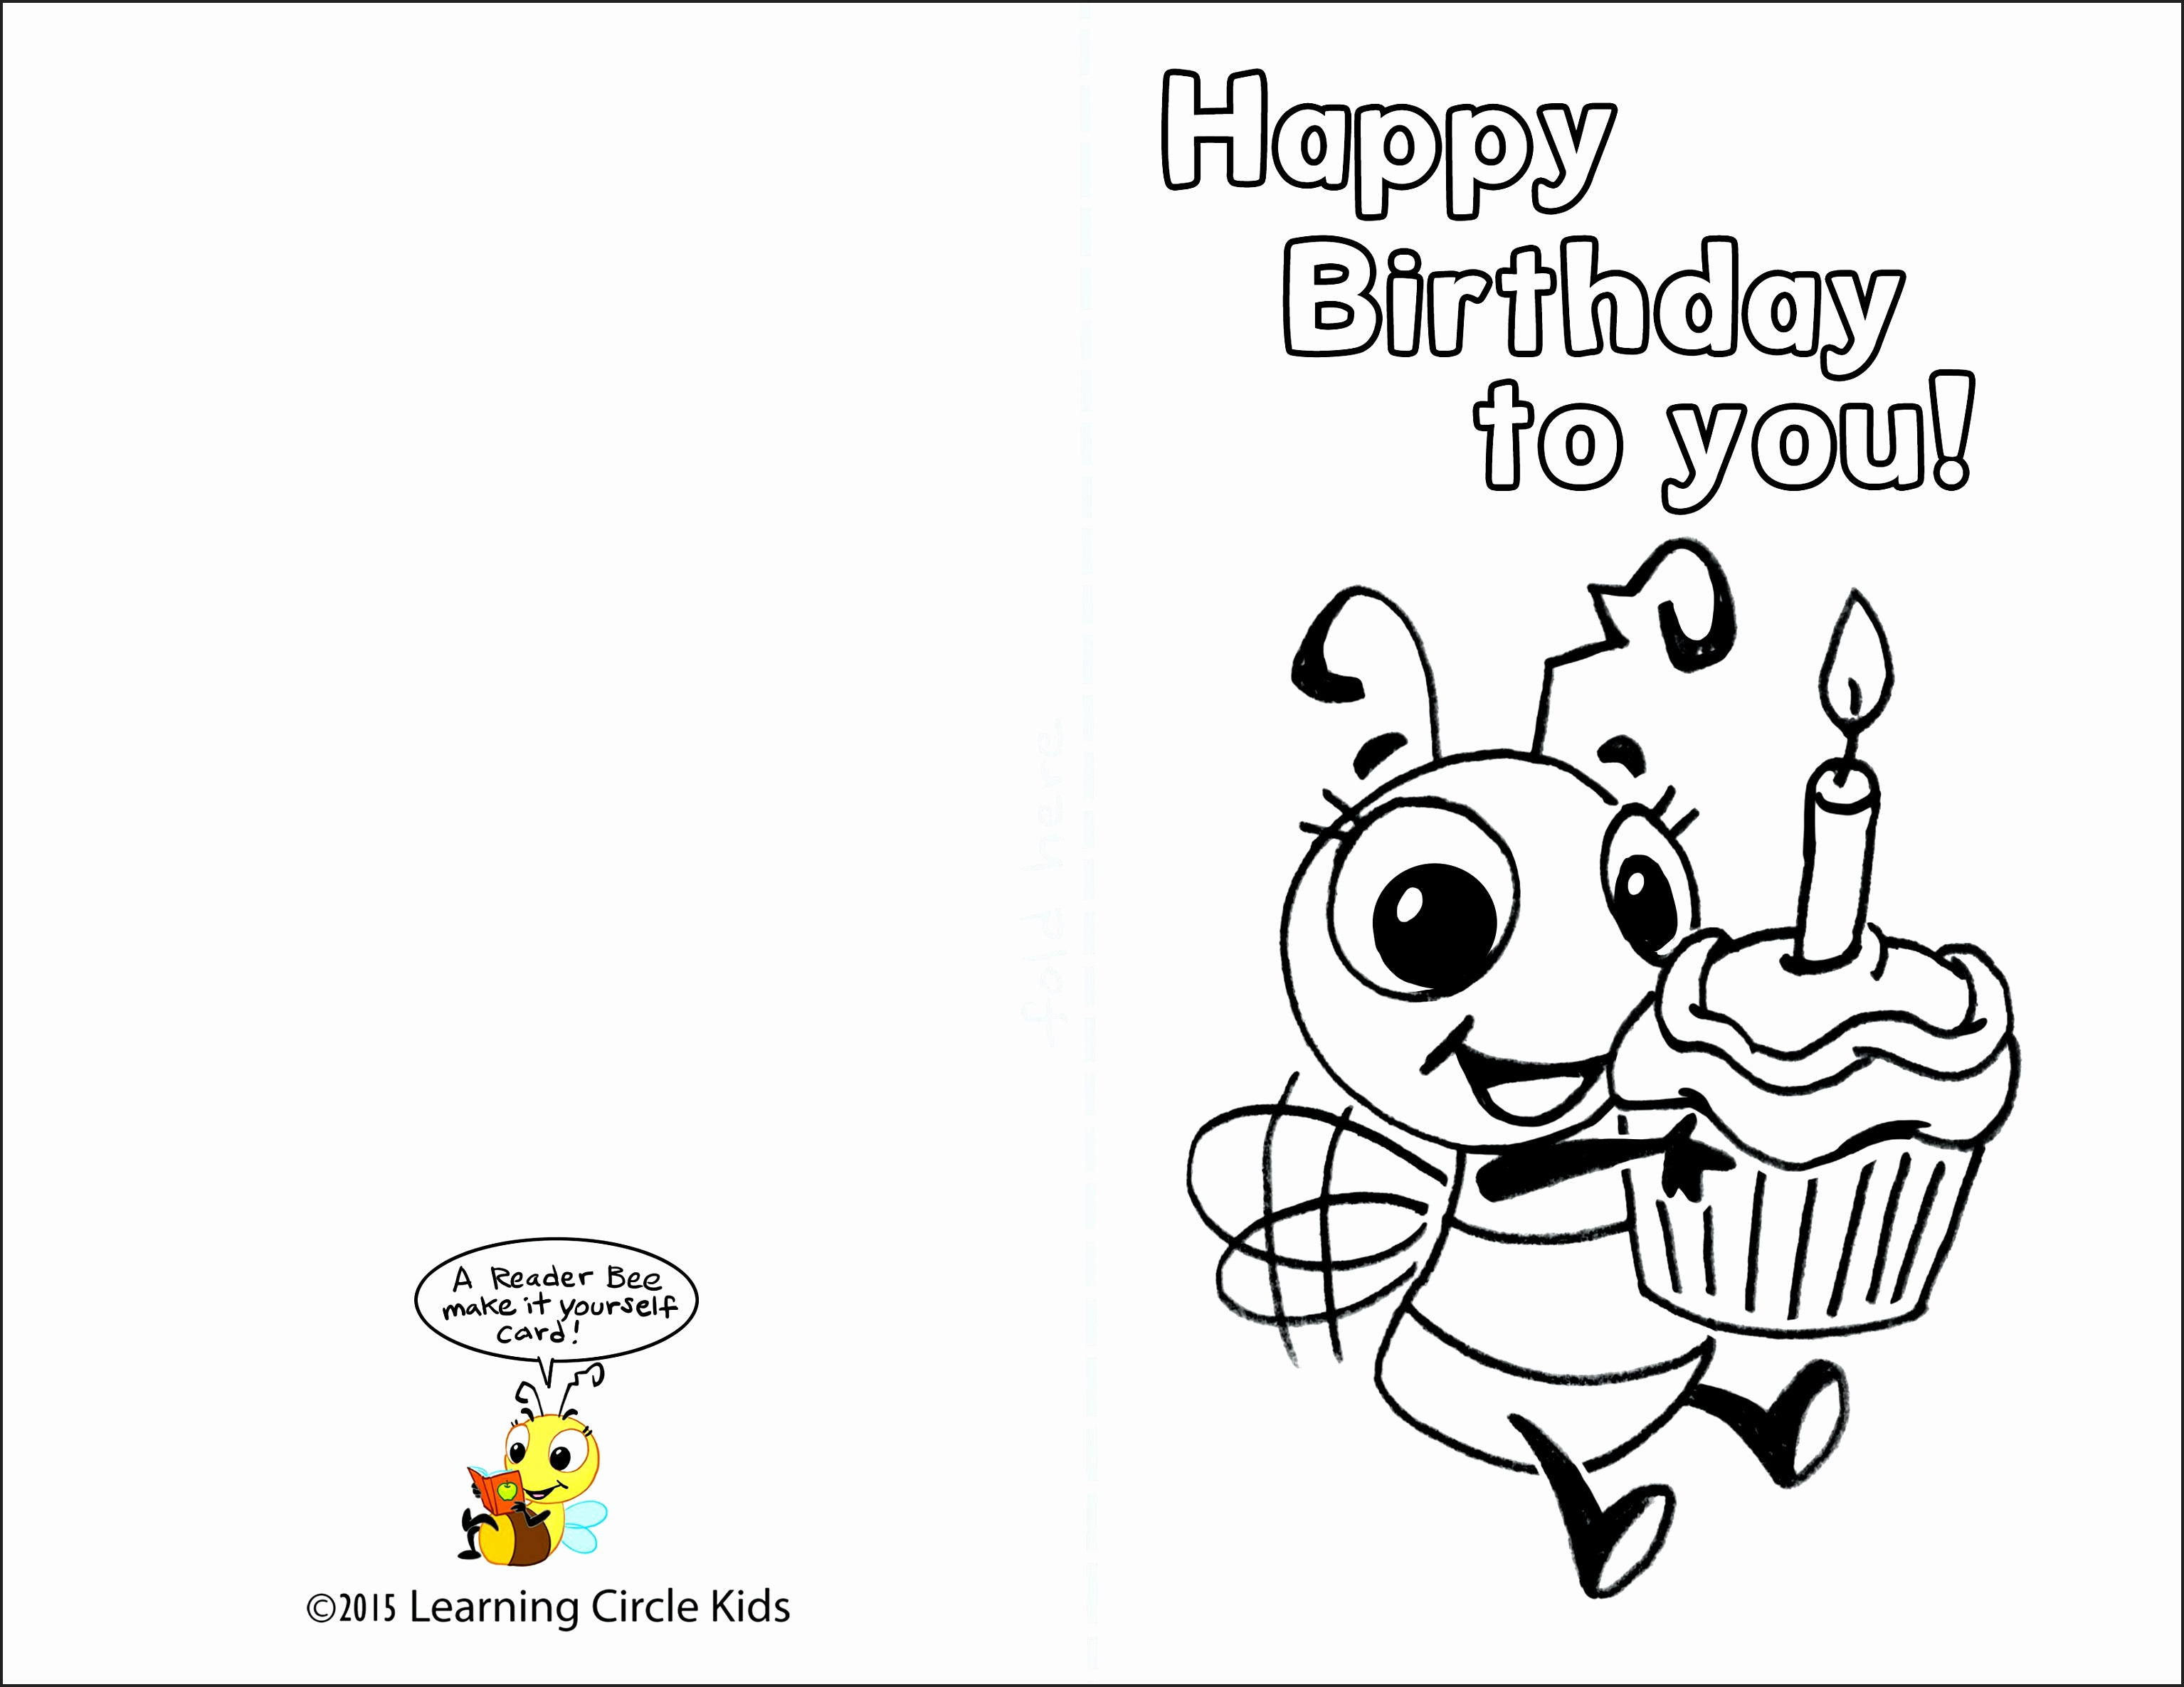 Free Printable Birthday Cards To Color - Printable Cards - Free Printable Birthday Cards For Adults